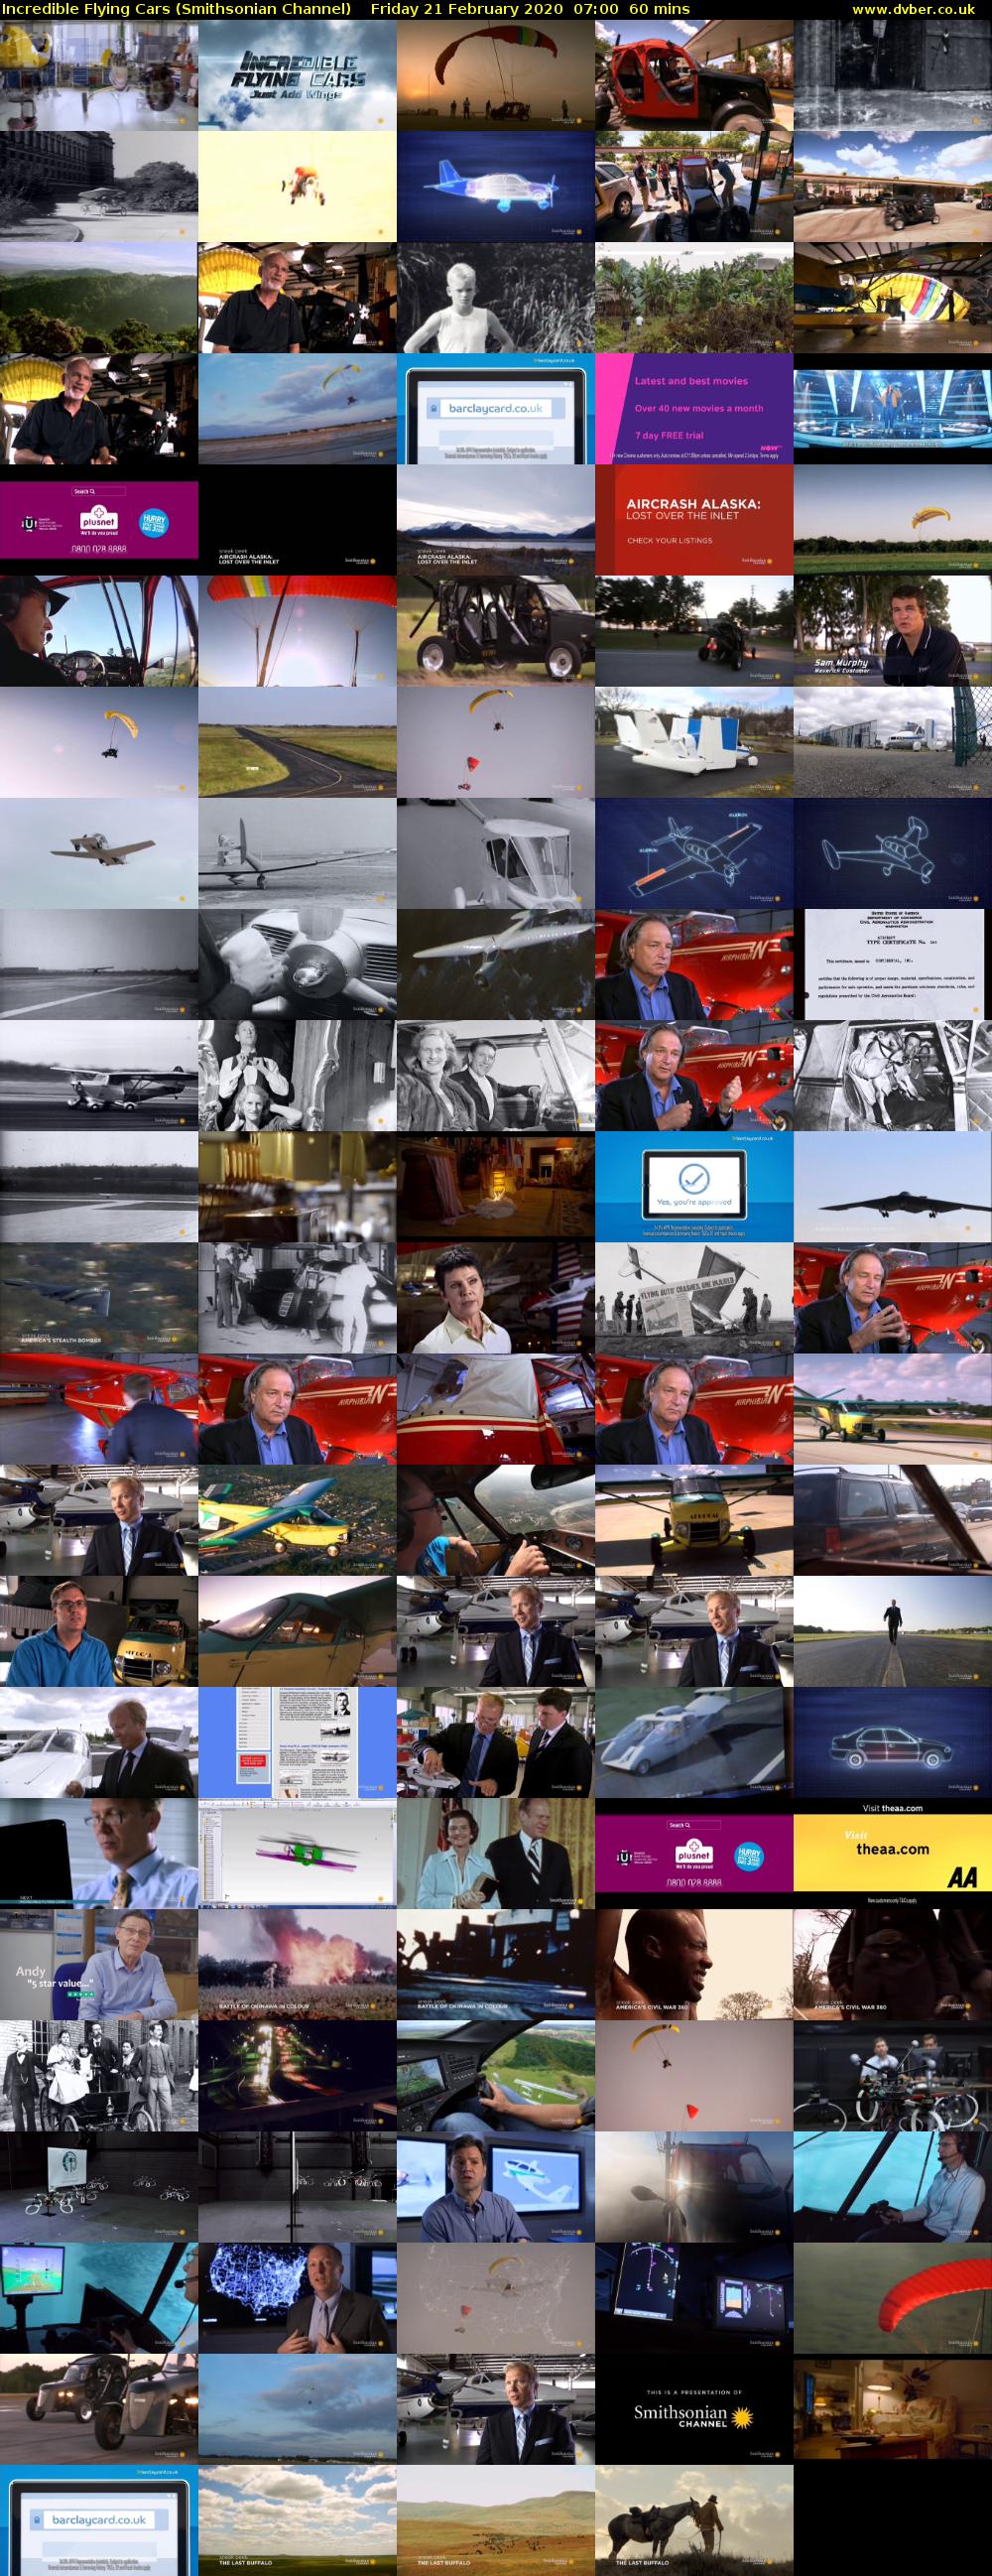 Incredible Flying Cars (Smithsonian Channel) Friday 21 February 2020 07:00 - 08:00